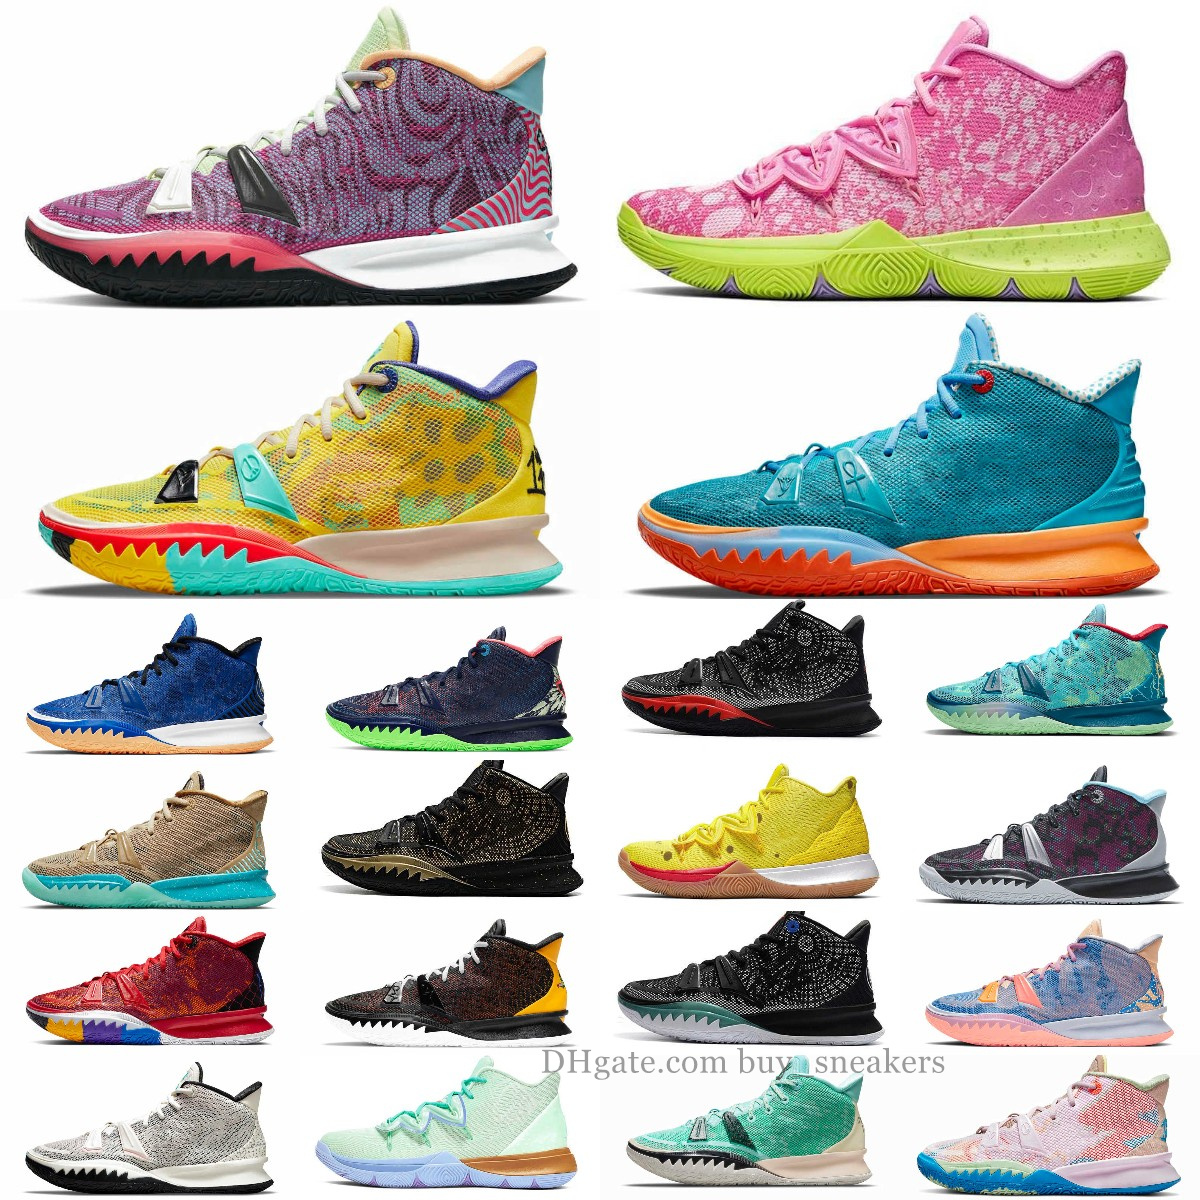 One World 1 Mens Basketball Shoes People Chip Bone Kyrie 7 Kyries 5s Sponge Sandy Creator Hendrix Horus Rayguns Daybreak Squidward Men Out Outdoor